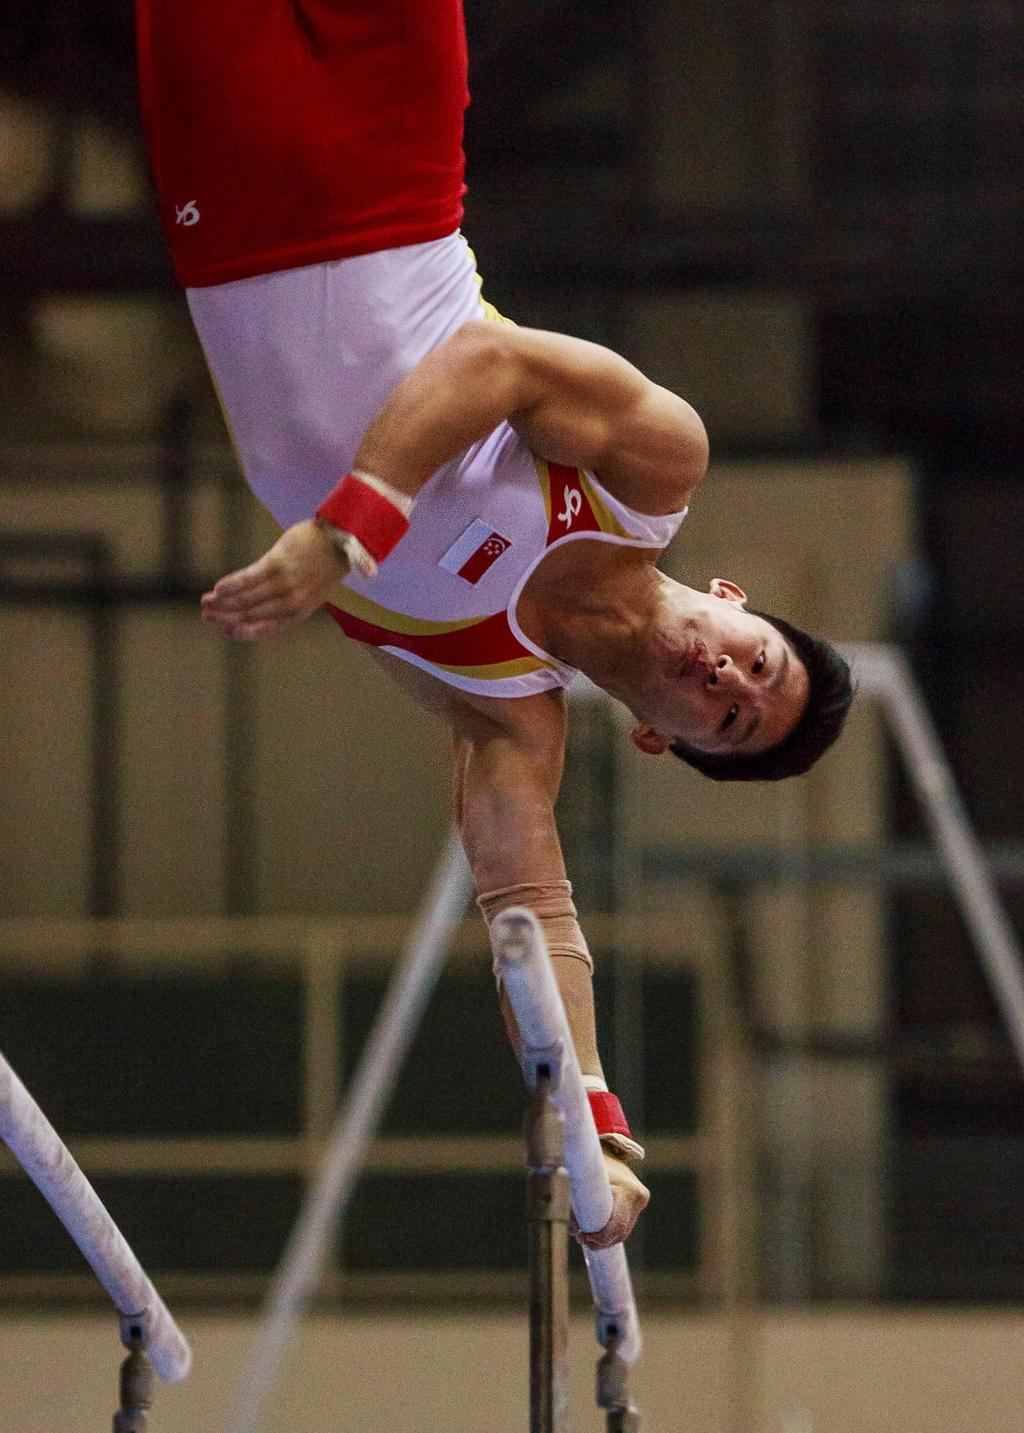 Pictured: Terry Tay Singapore Open Gymnastics